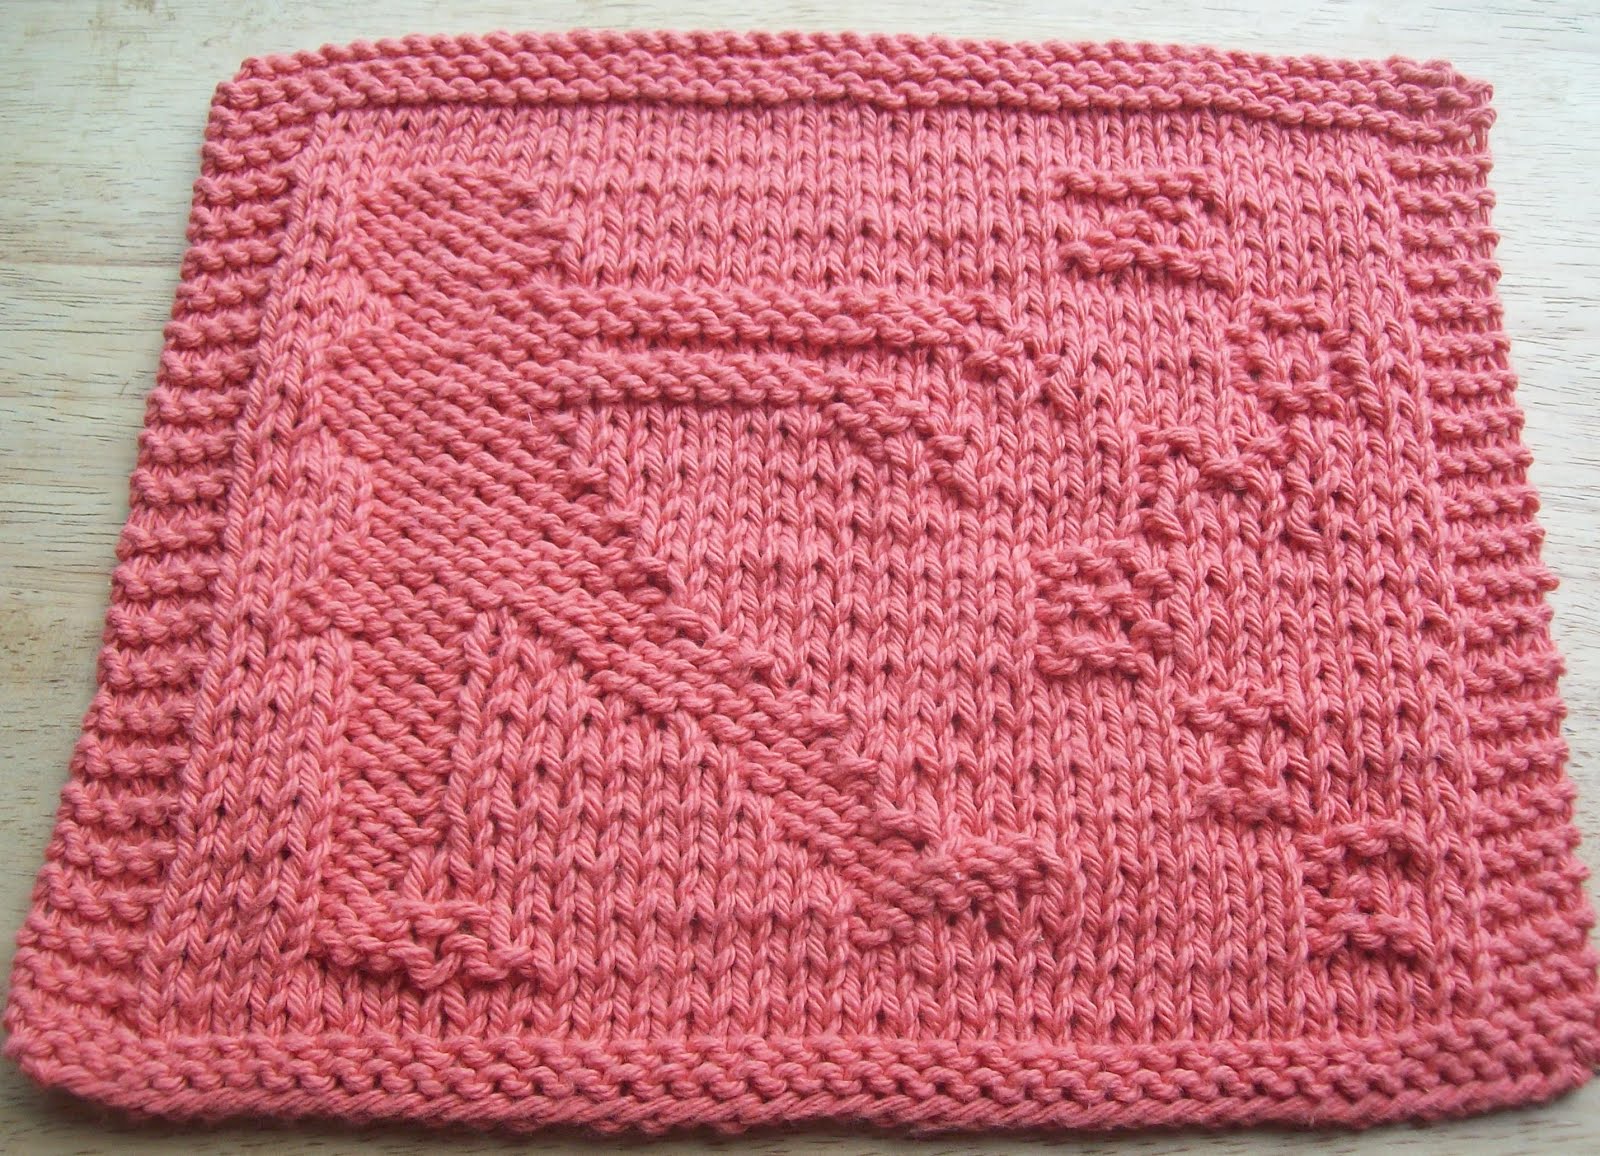 A pink knitted dishcloth incorporating a zombie into the design.